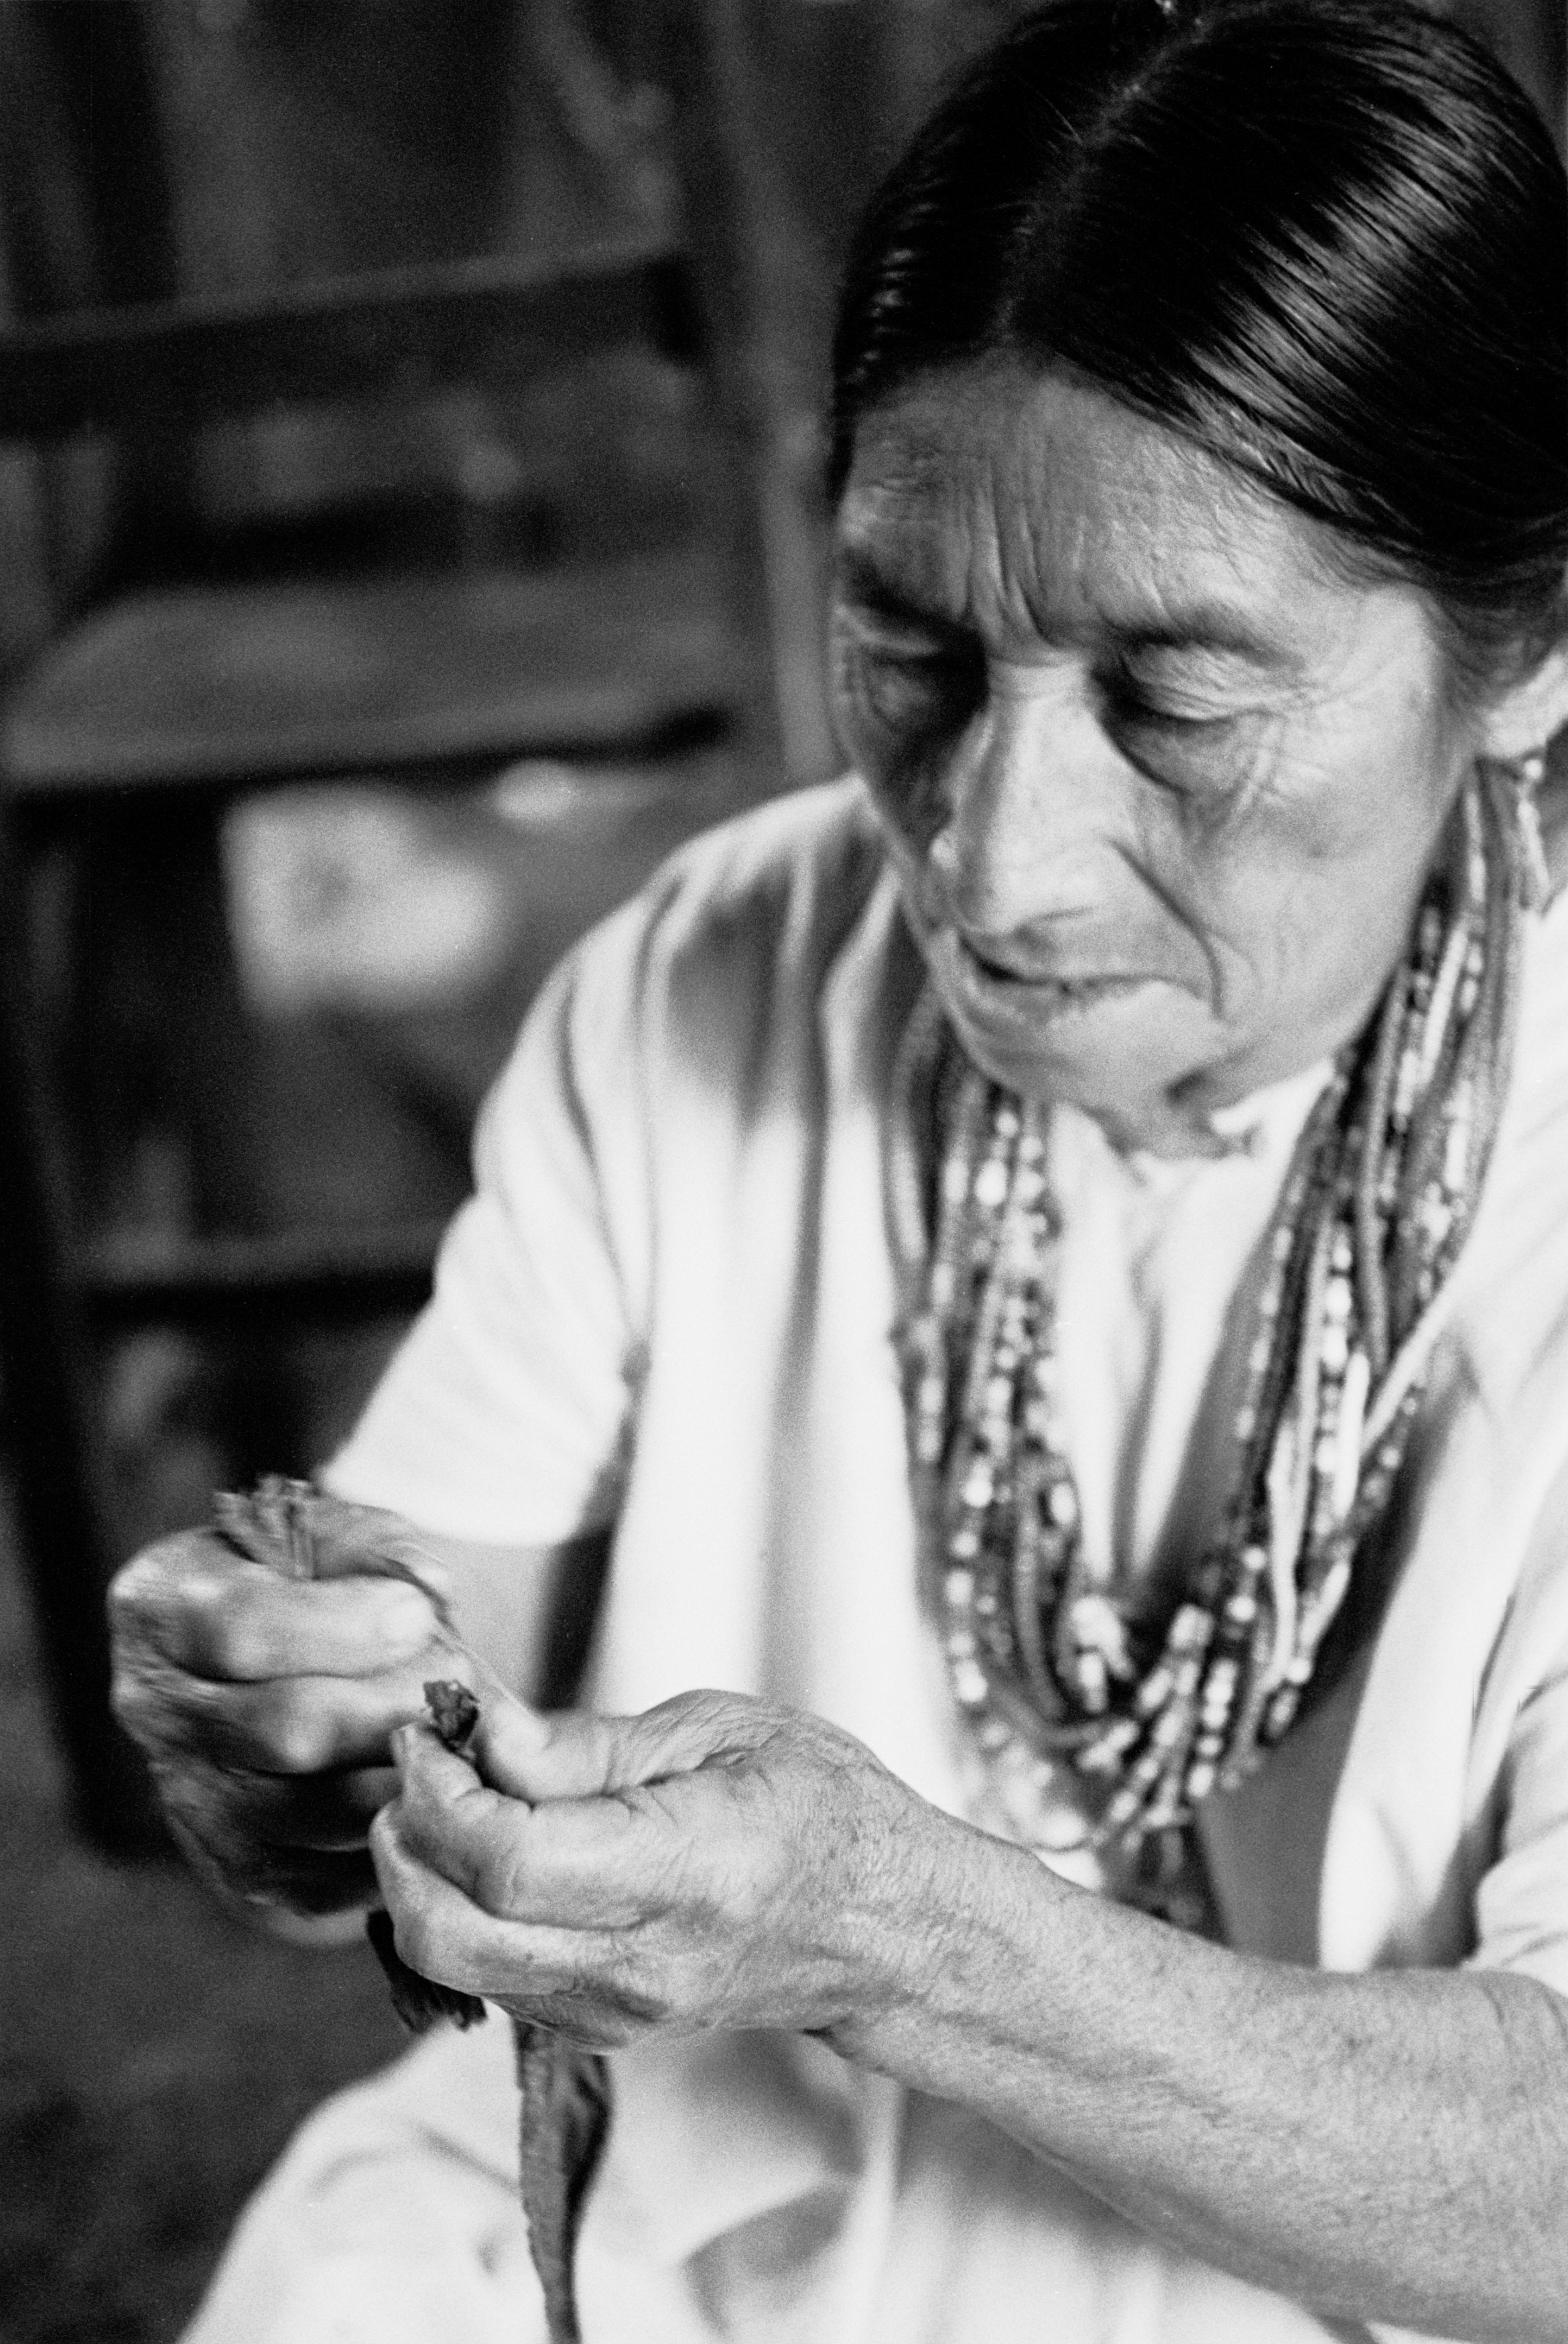  Koh-Maria, the first wife of Chankin Viejo, rolling cigars. Since his death she has kept the rolling of cigars tradition alive and passed it on to her children.  The cigars will be used in religious ceremonies and smoked for recreation.   